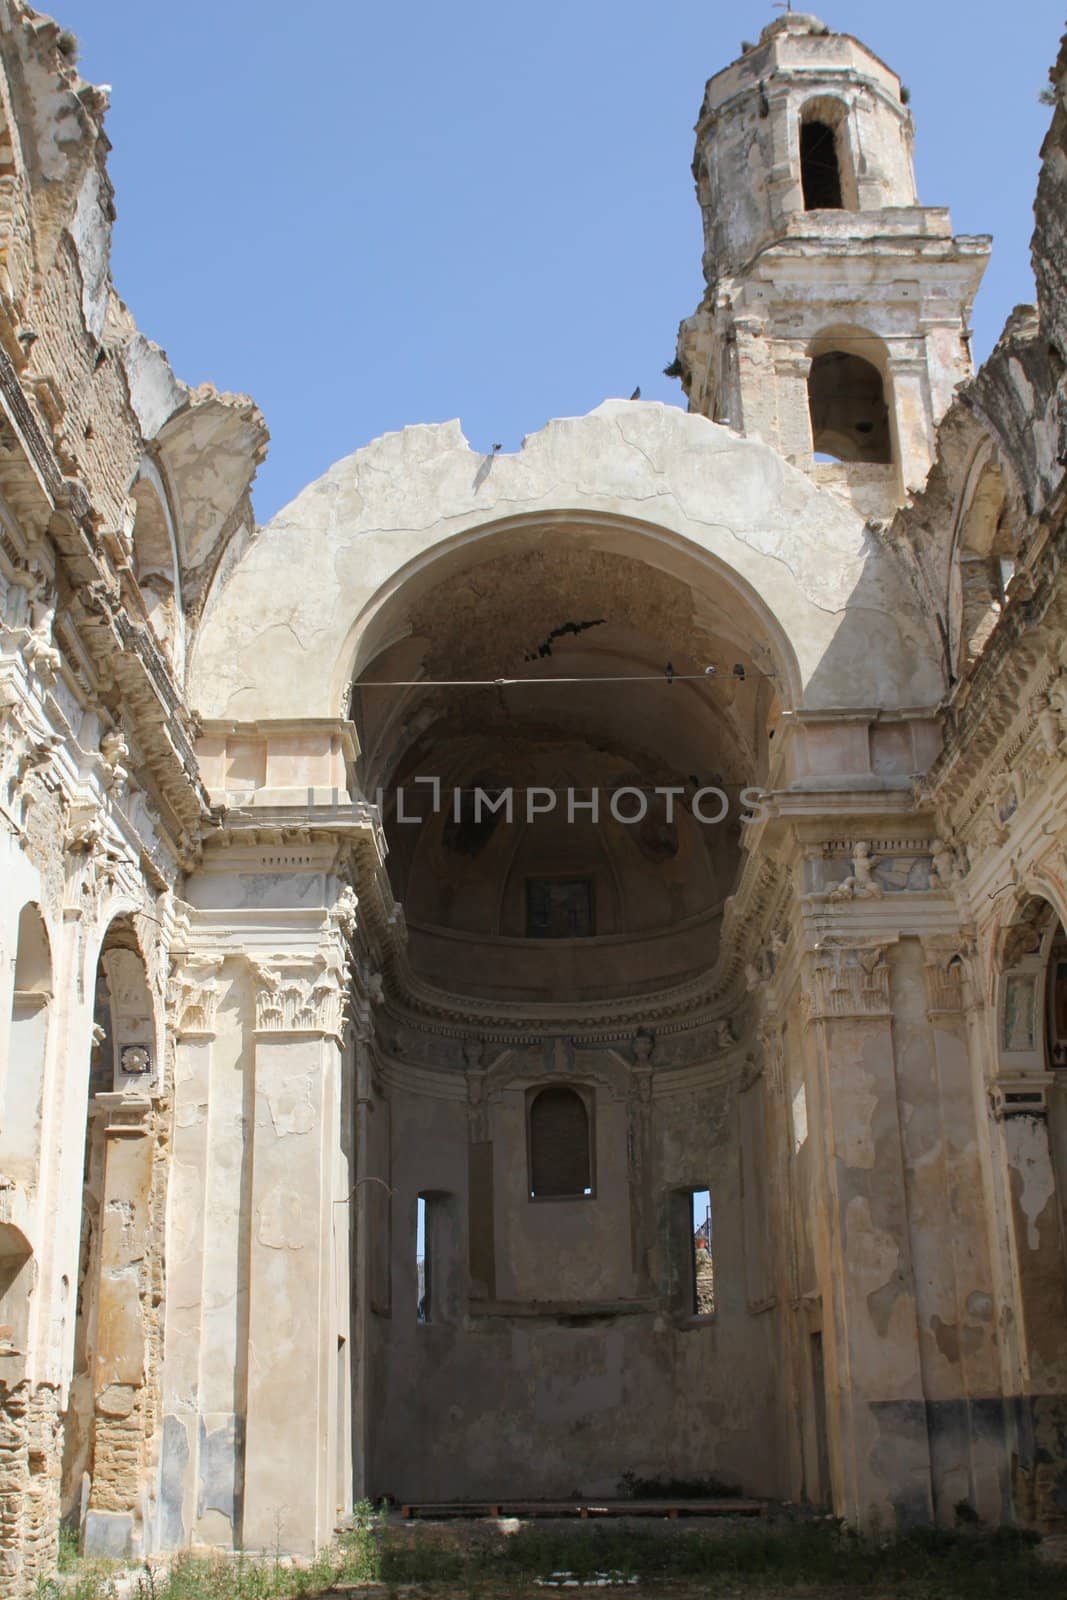 Ruins of an old church in old Bussana, a village destroyed by an earthquake and then abandoned. It is now an International Artists Village